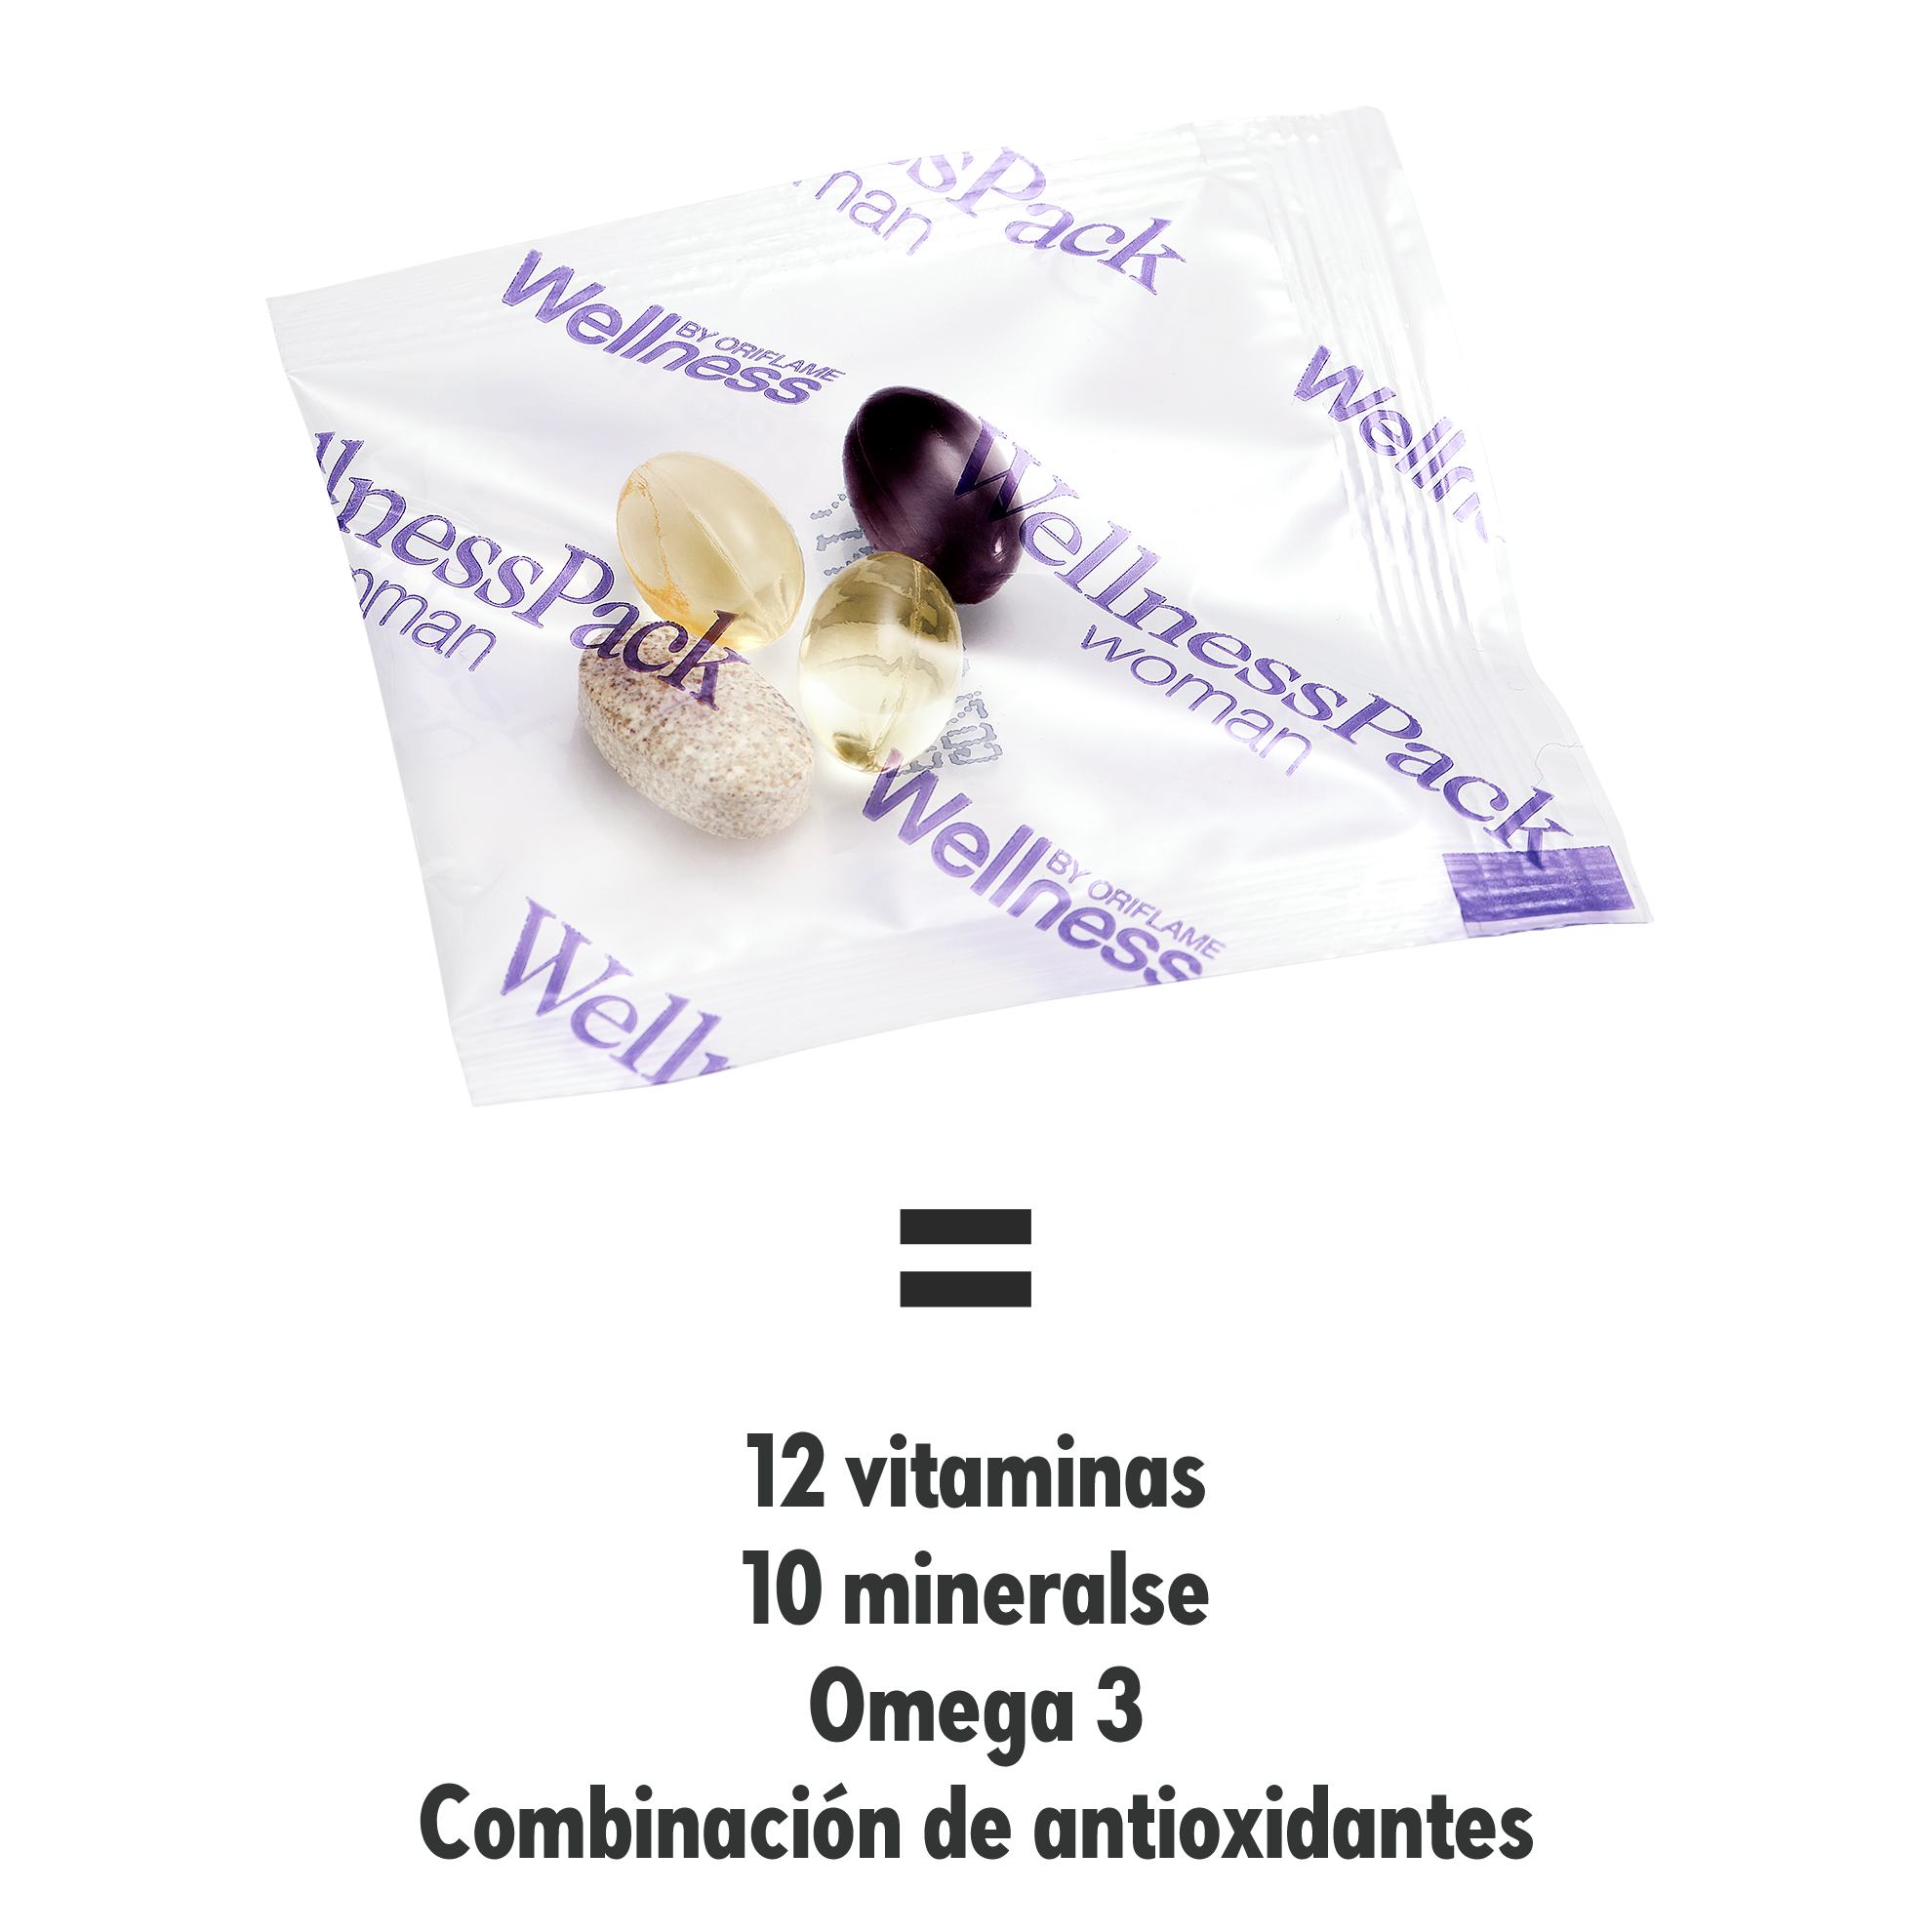 https://media-cdn.oriflame.com/productImage?externalMediaId=product-management-media%2fProducts%2f29696%2fES%2f29696_4.png&id=16365692&version=1